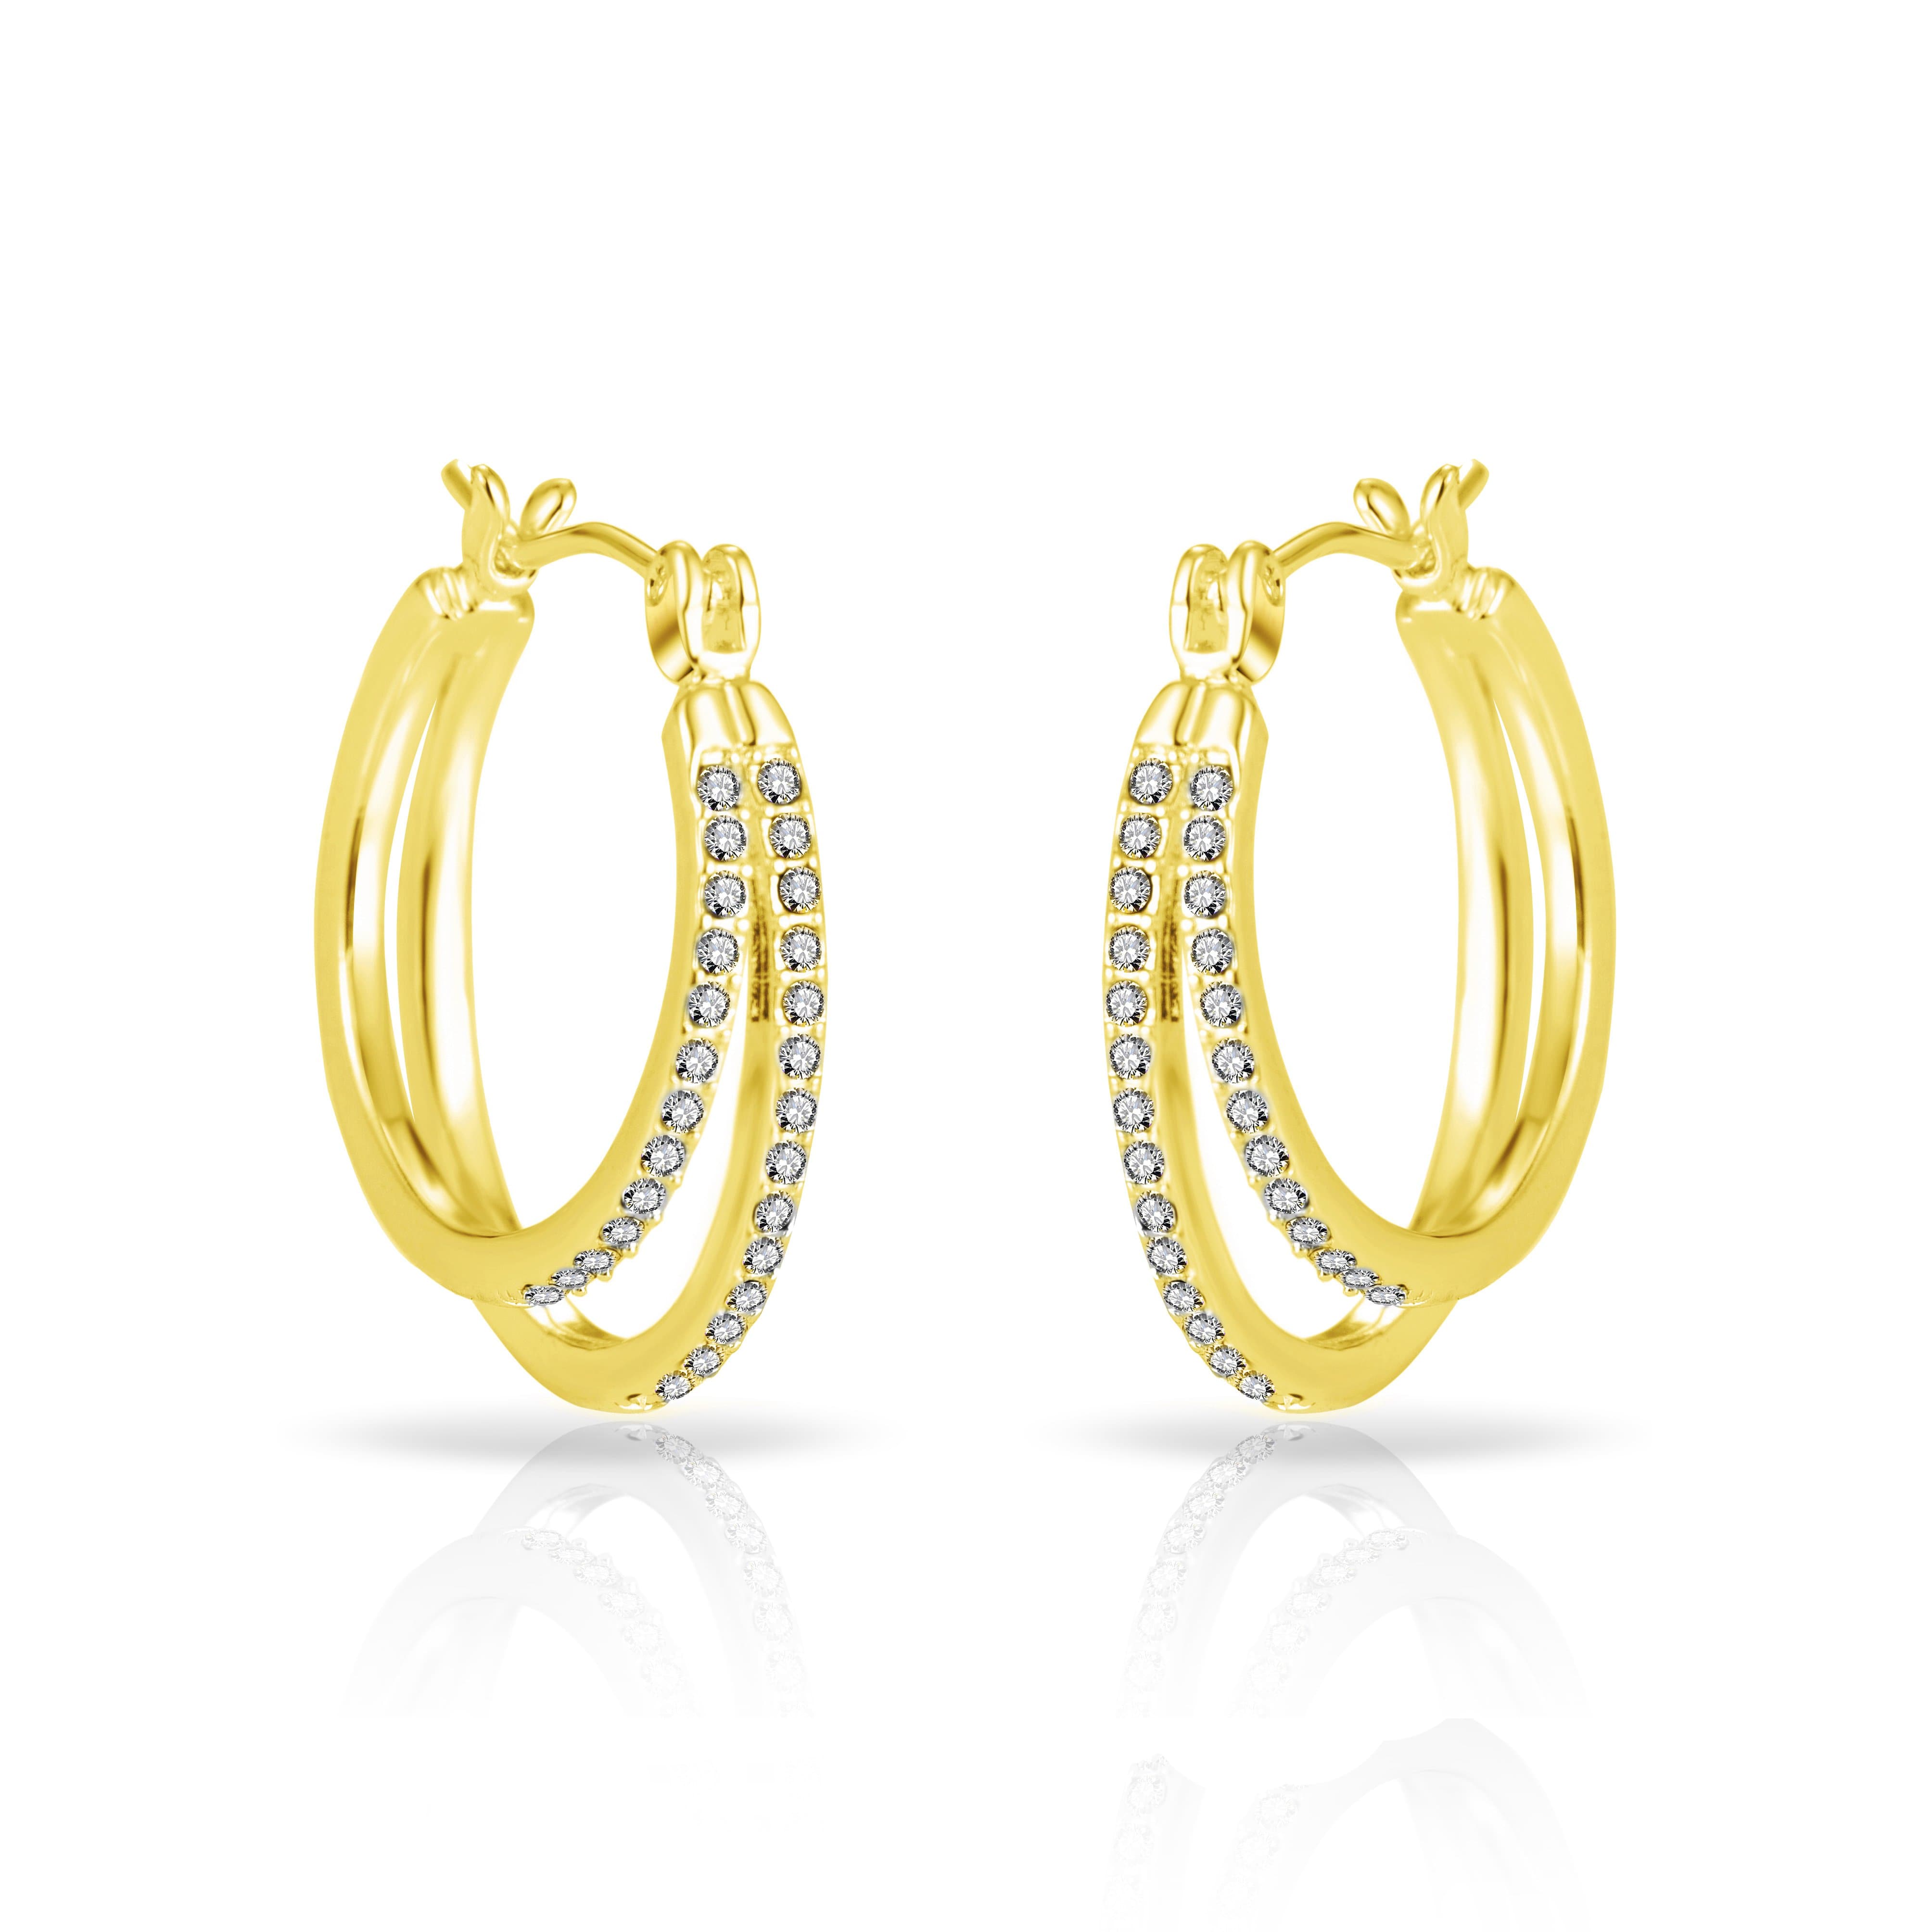 Gold Plated Double Hoop Earrings Created with Zircondia® Crystals by Philip Jones Jewellery